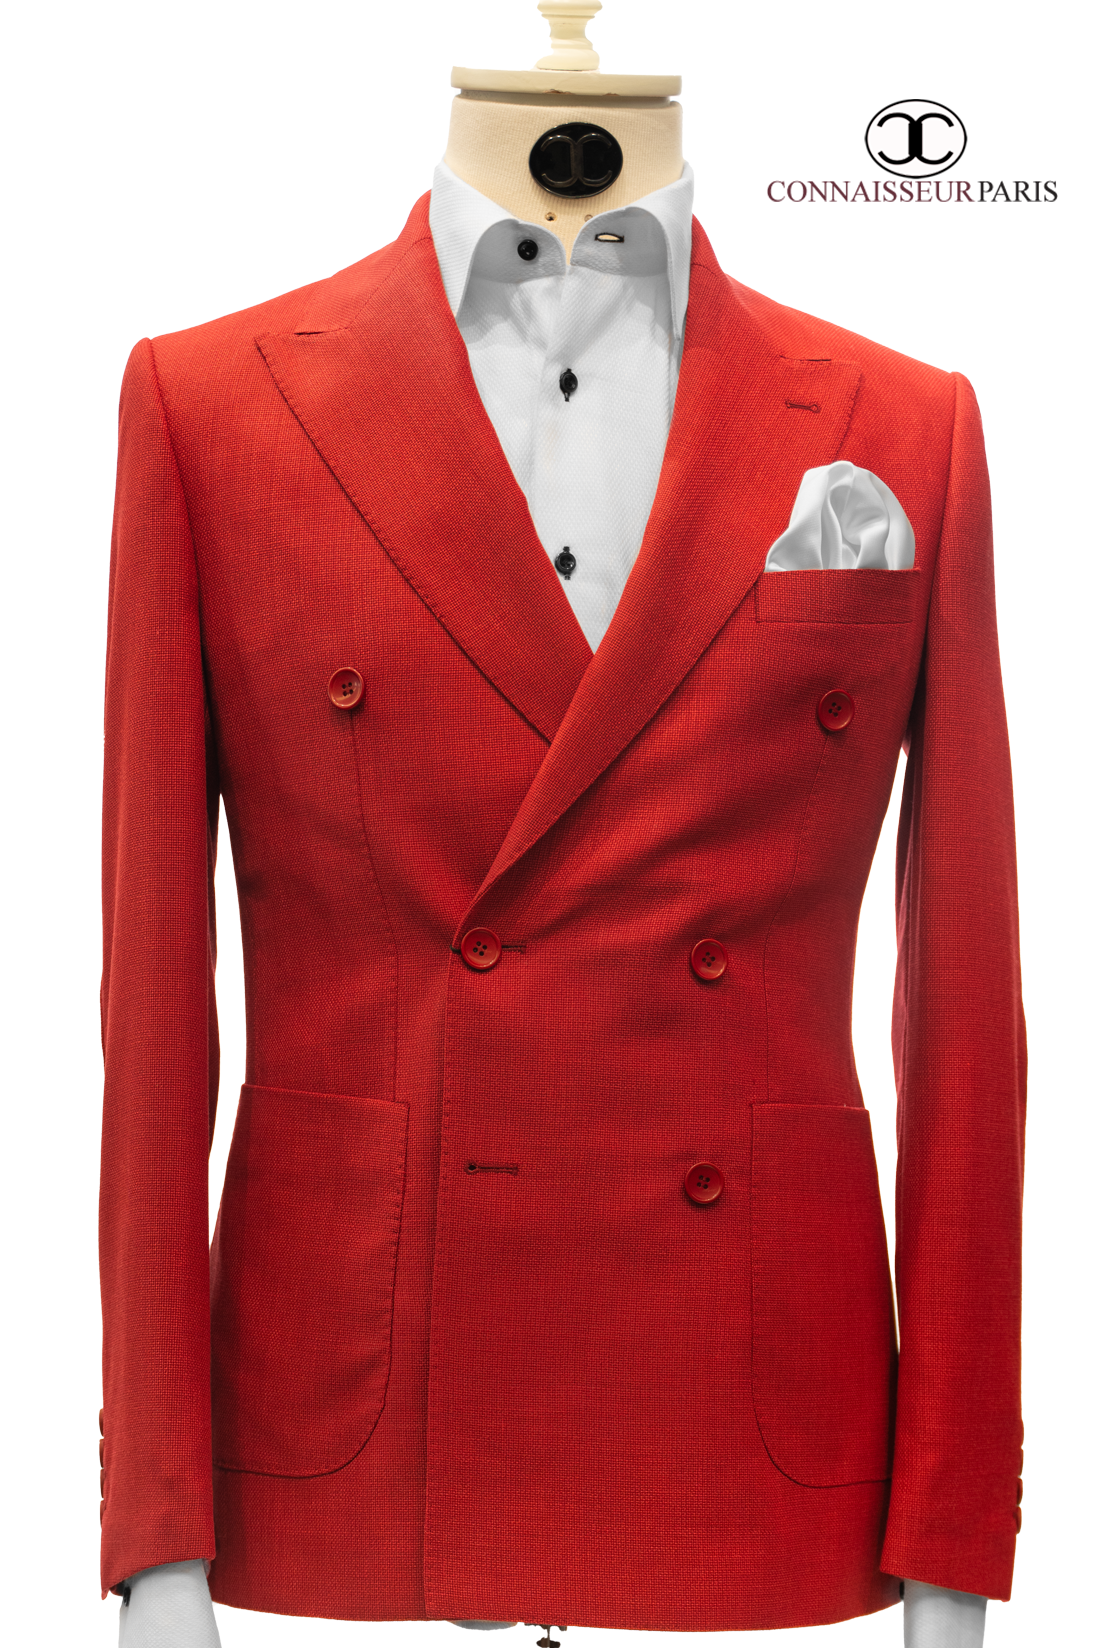 Vercelli - Red Patch Pocket Elbow Patch Tweed Double Breasted Slim Fit 2-Piece Suit